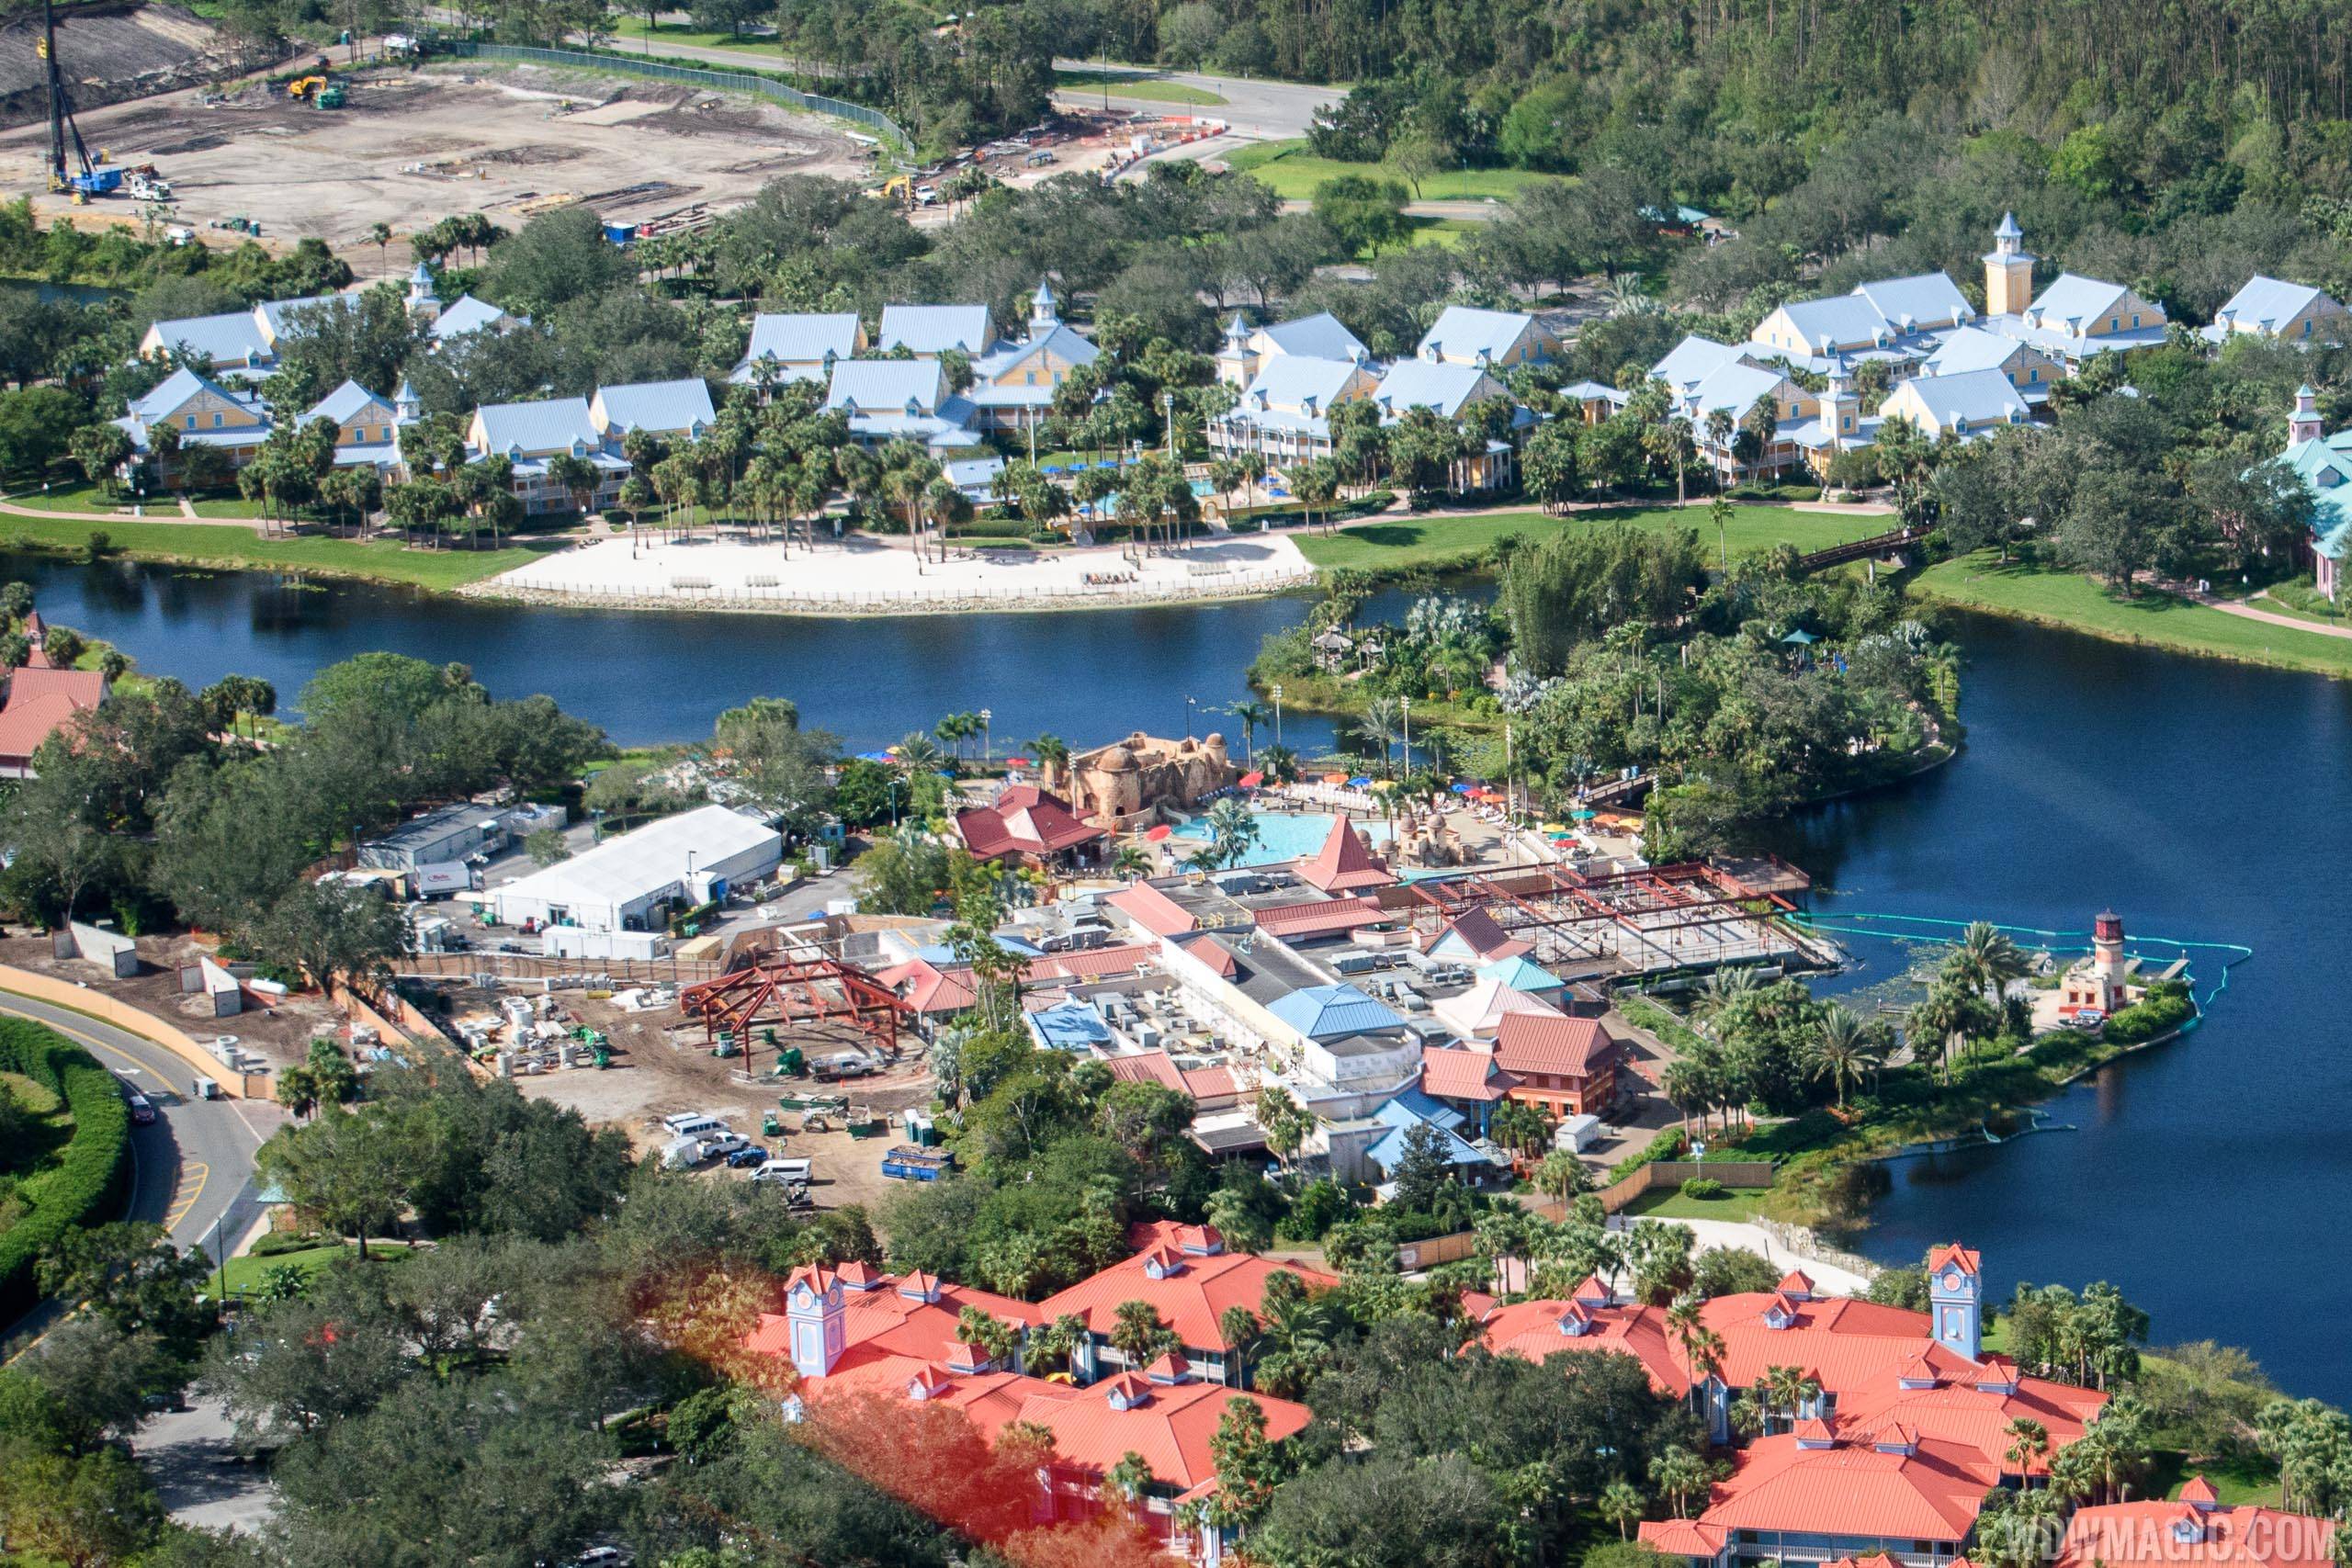 PHOTOS - Significant expansion underway at Disney's Caribbean Beach Resort Old Port Royale